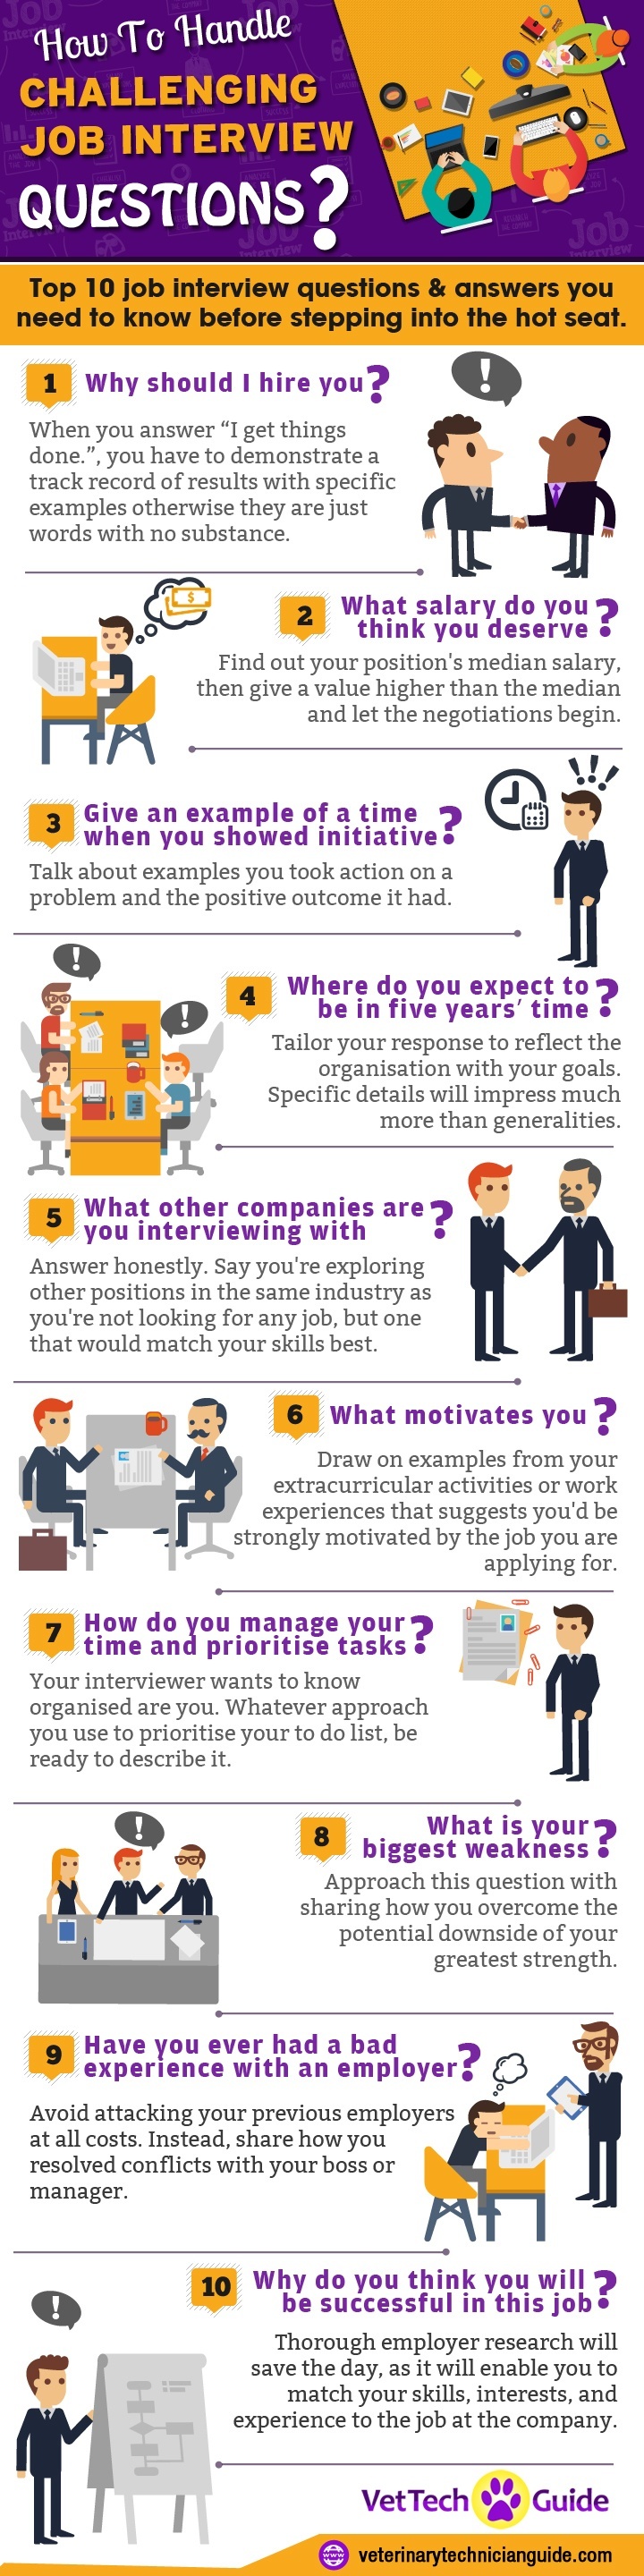 How To Handle Challenging Job Interview Questions Skip Prichard